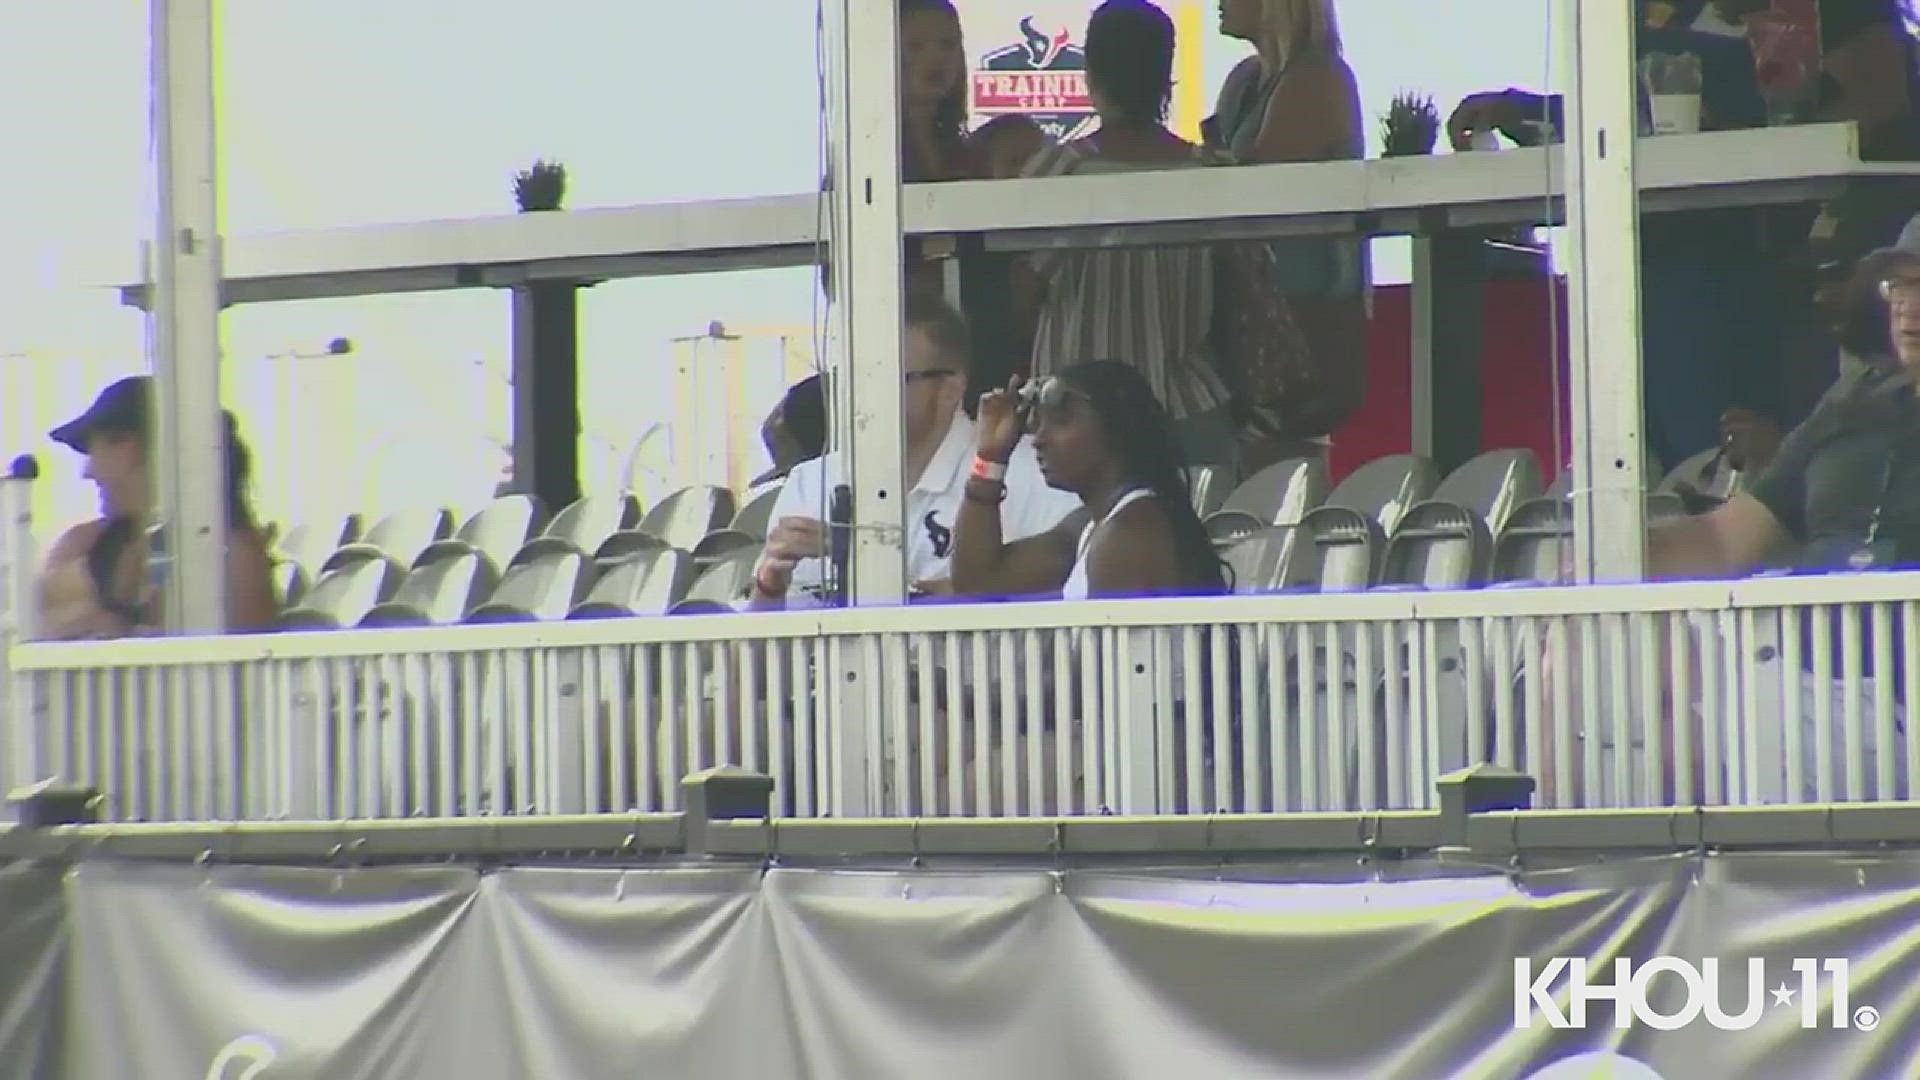 A day after returning home from the Tokyo Olympics, star gymnast Simone Biles visited Houston Texans training camp Friday morning.